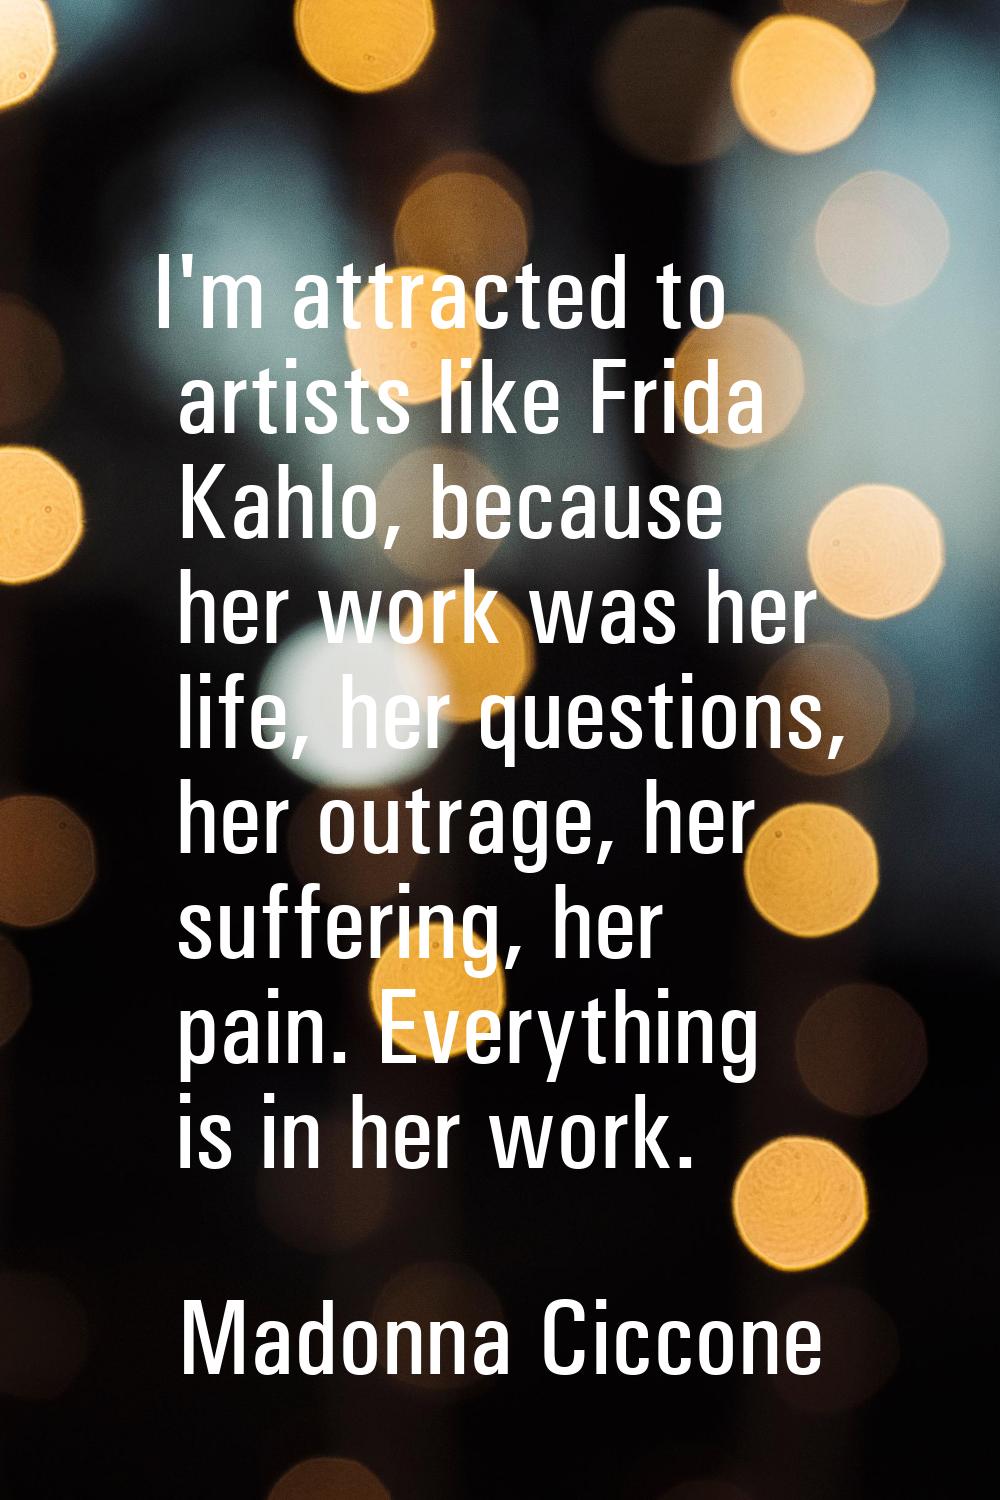 I'm attracted to artists like Frida Kahlo, because her work was her life, her questions, her outrag